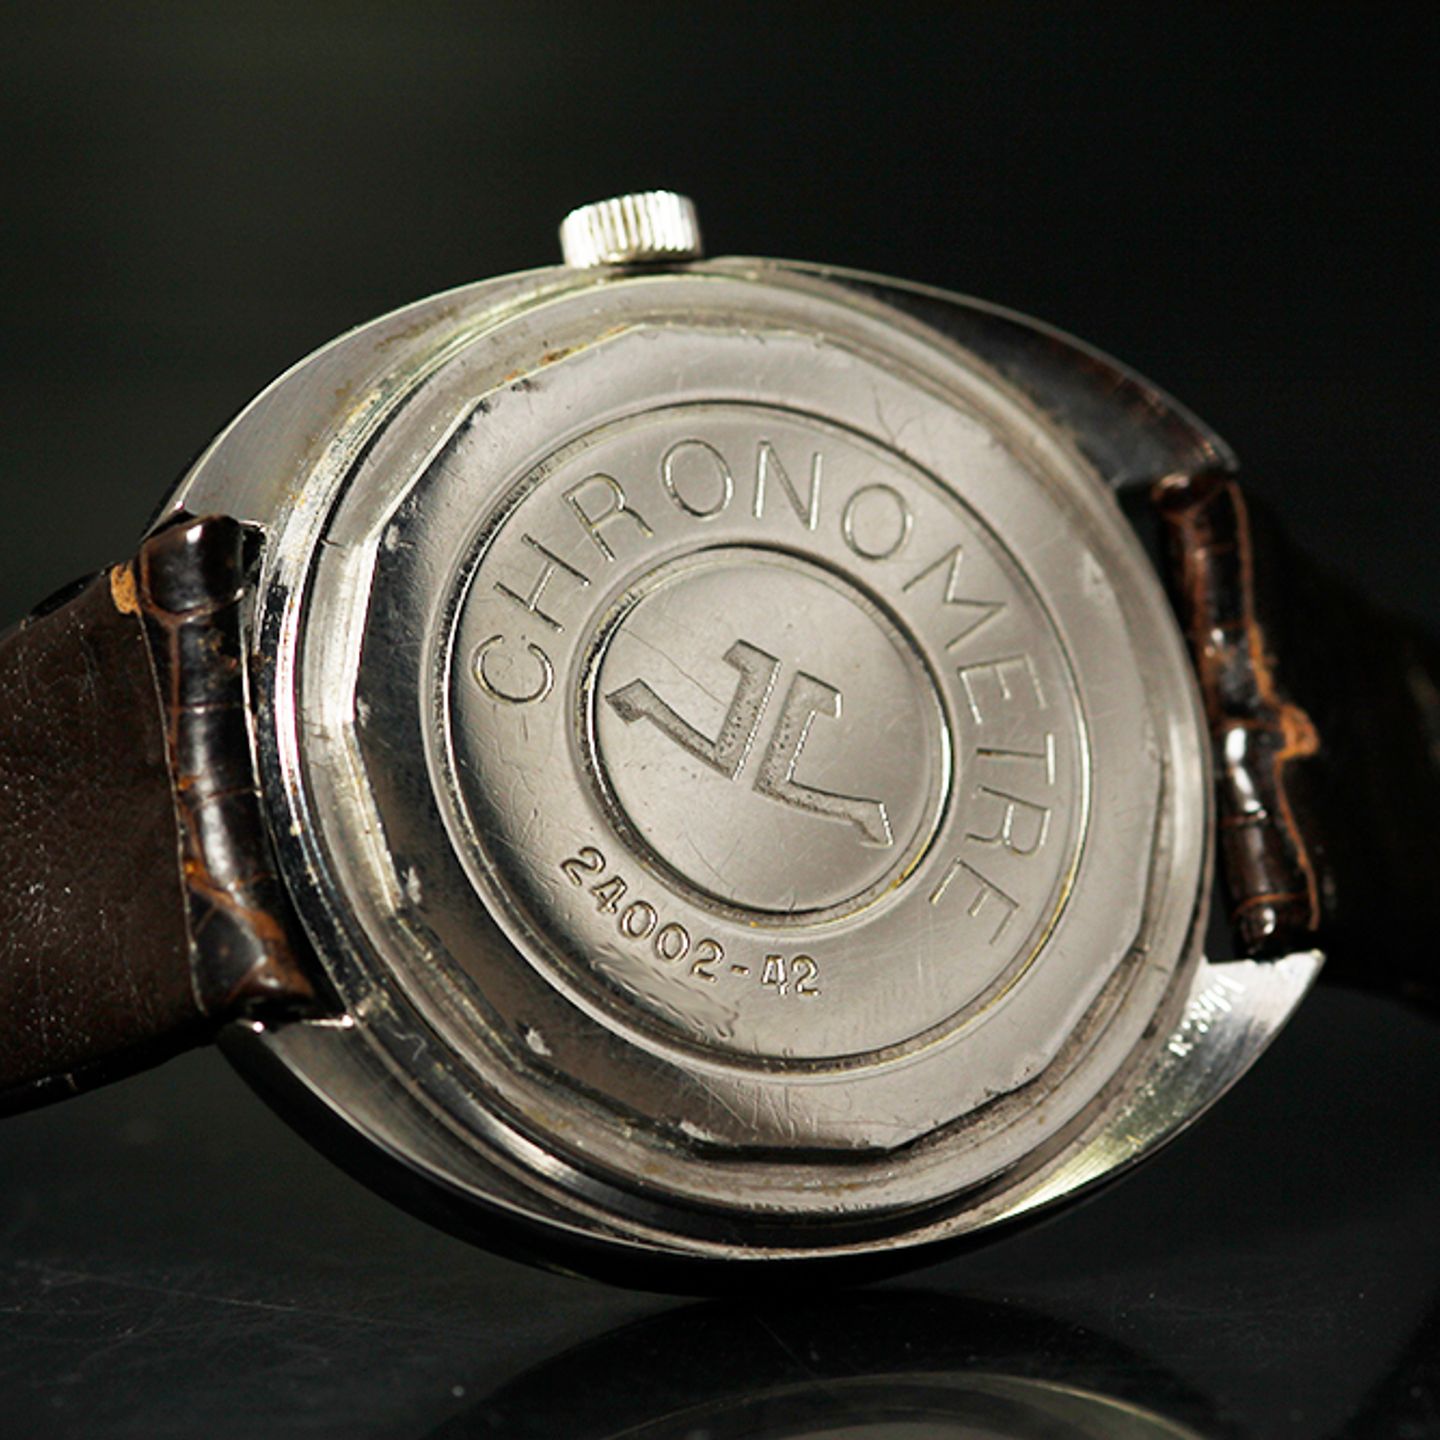 Jaeger-LeCoultre Chronometre 24002-42 (1970) - Wit wijzerplaat 38mm Staal (6/8)